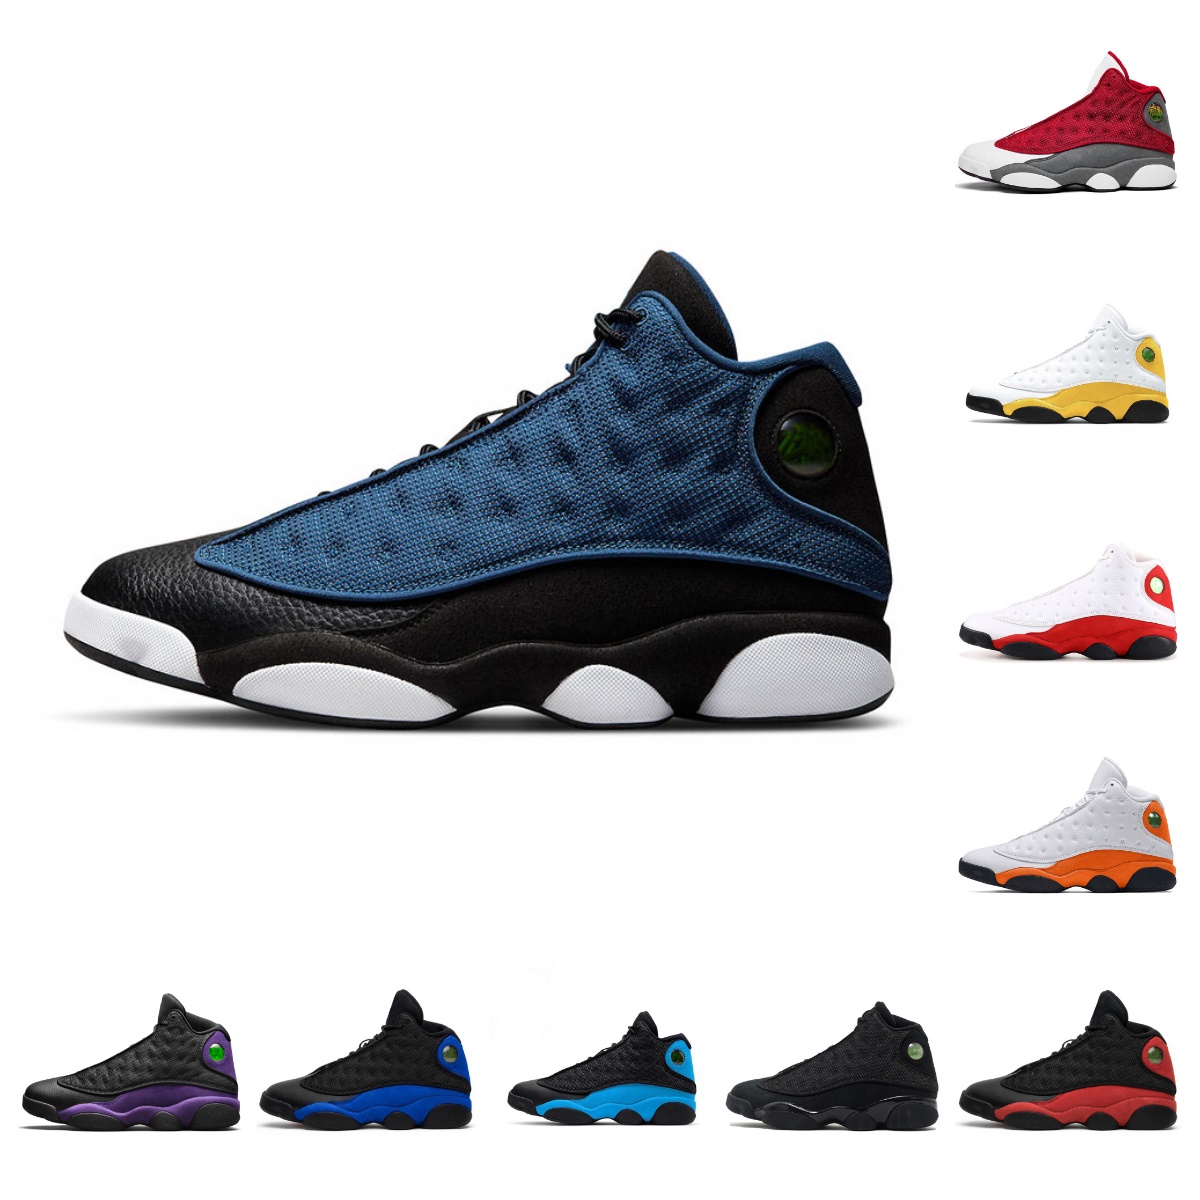 

Jumpman 13 13s Mens Basketball Shoes Hyper Royal French Blue Linen Island Green Obsidian Bred Midnight Navy Black Cat Del Sol Barons Gym Red Flint Trainers Sneakers, Bubble package bag